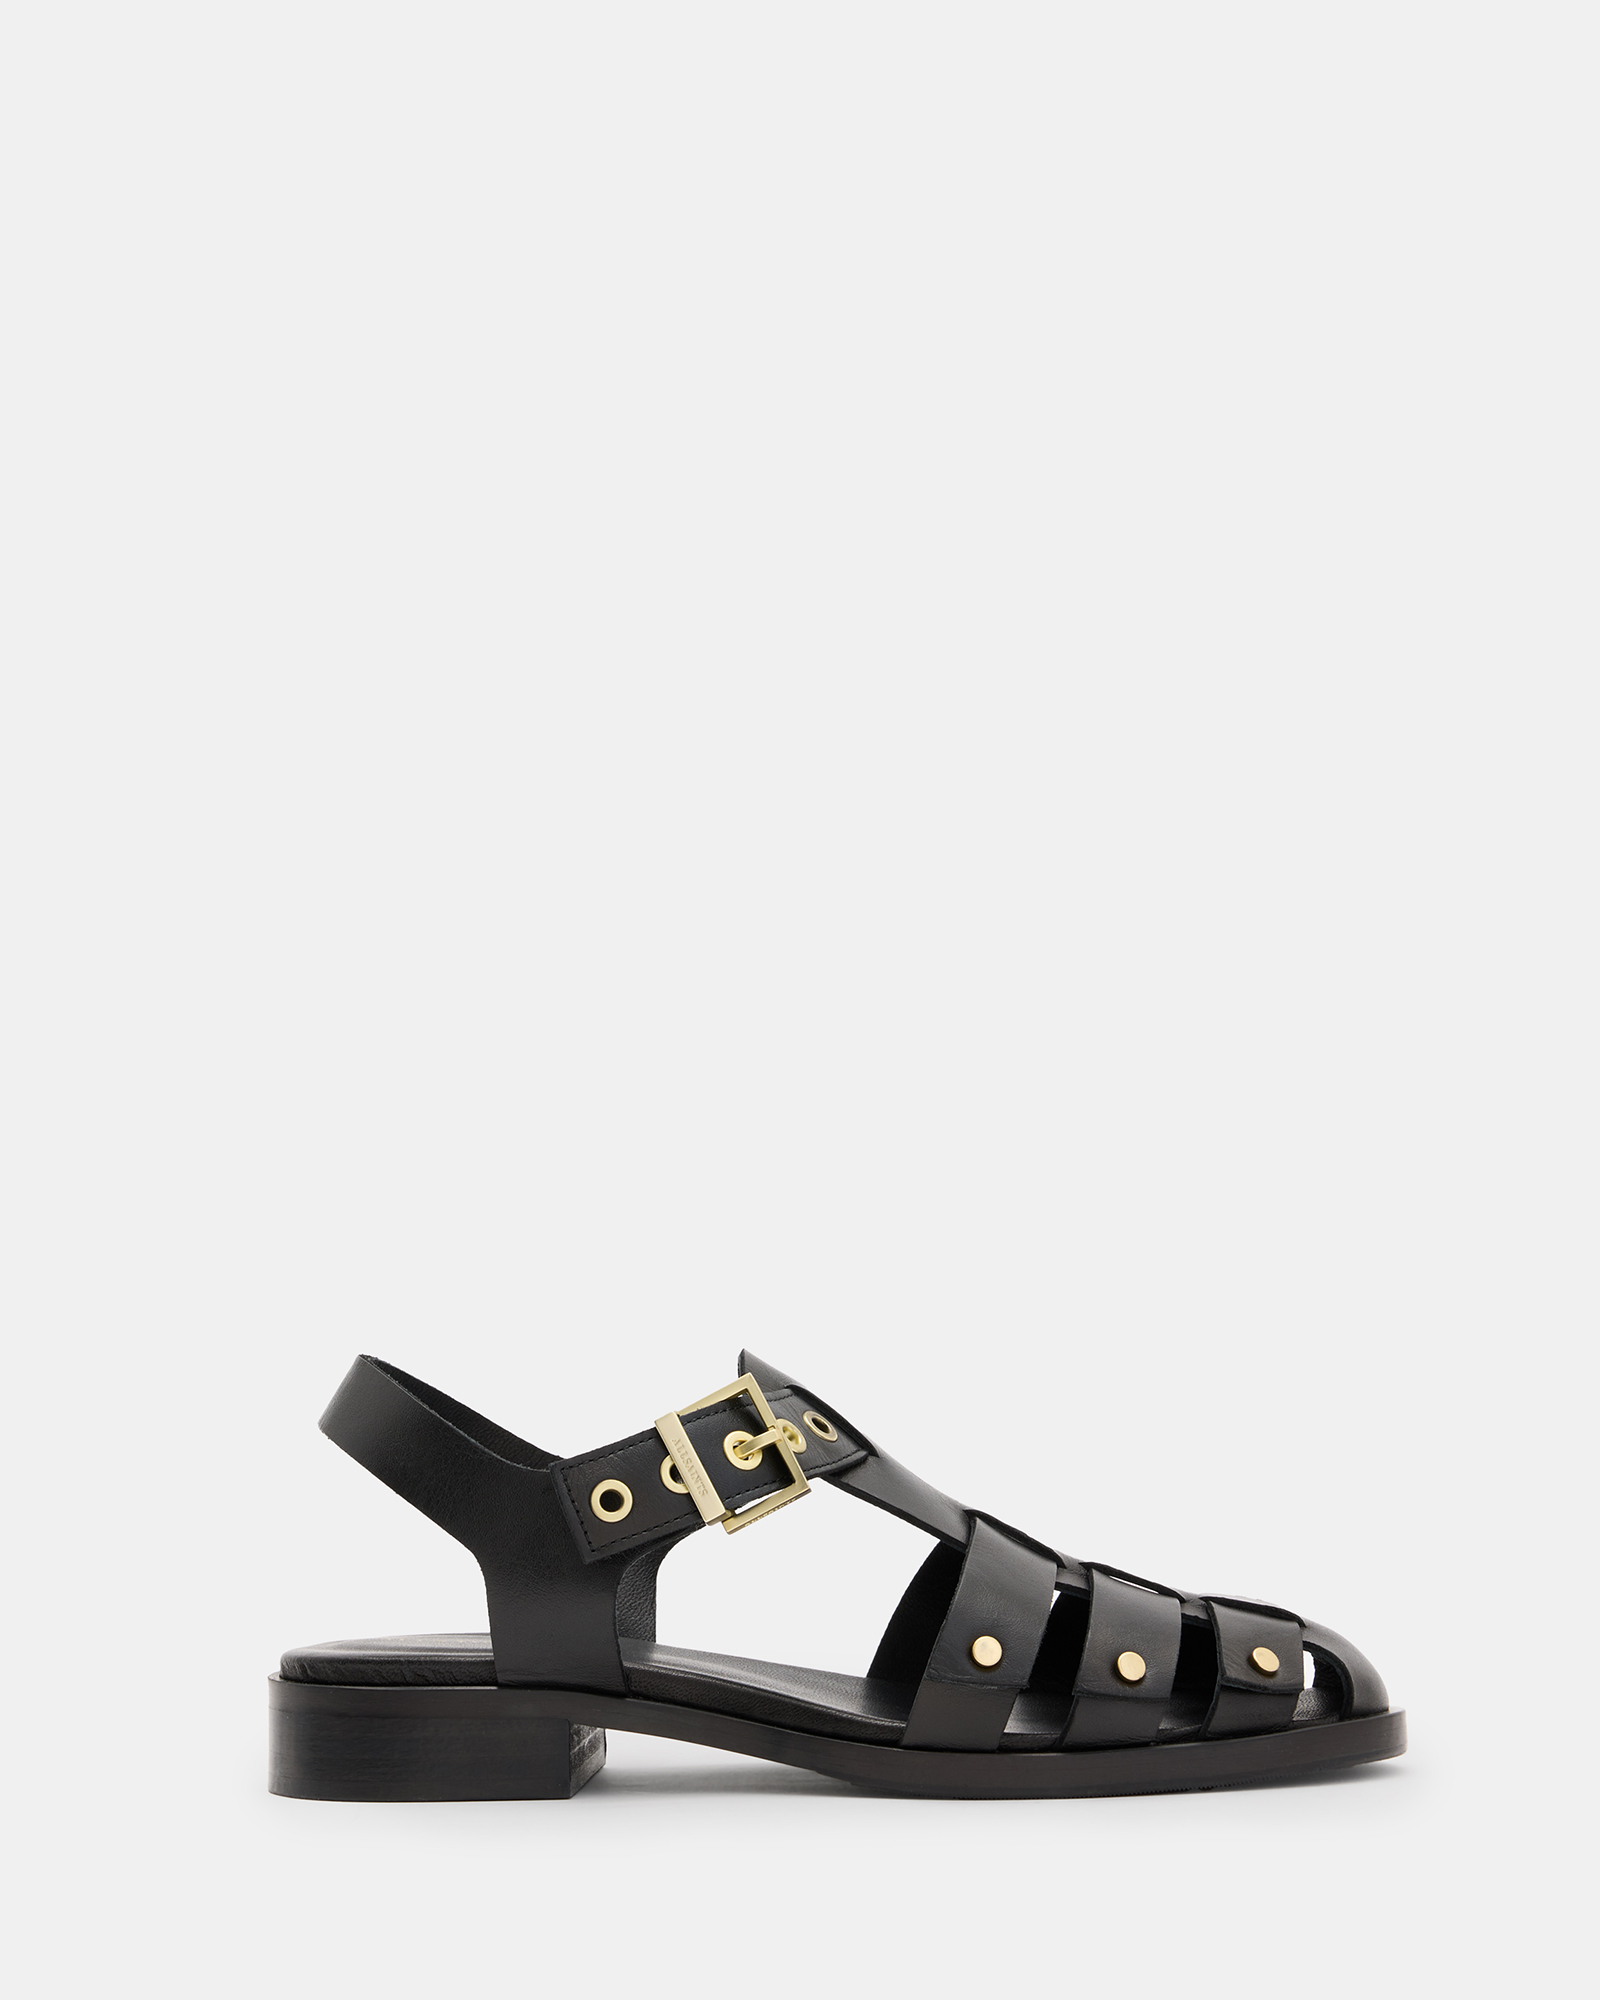 AllSaints Nelly Studded Leather Sandals,, Size: UK